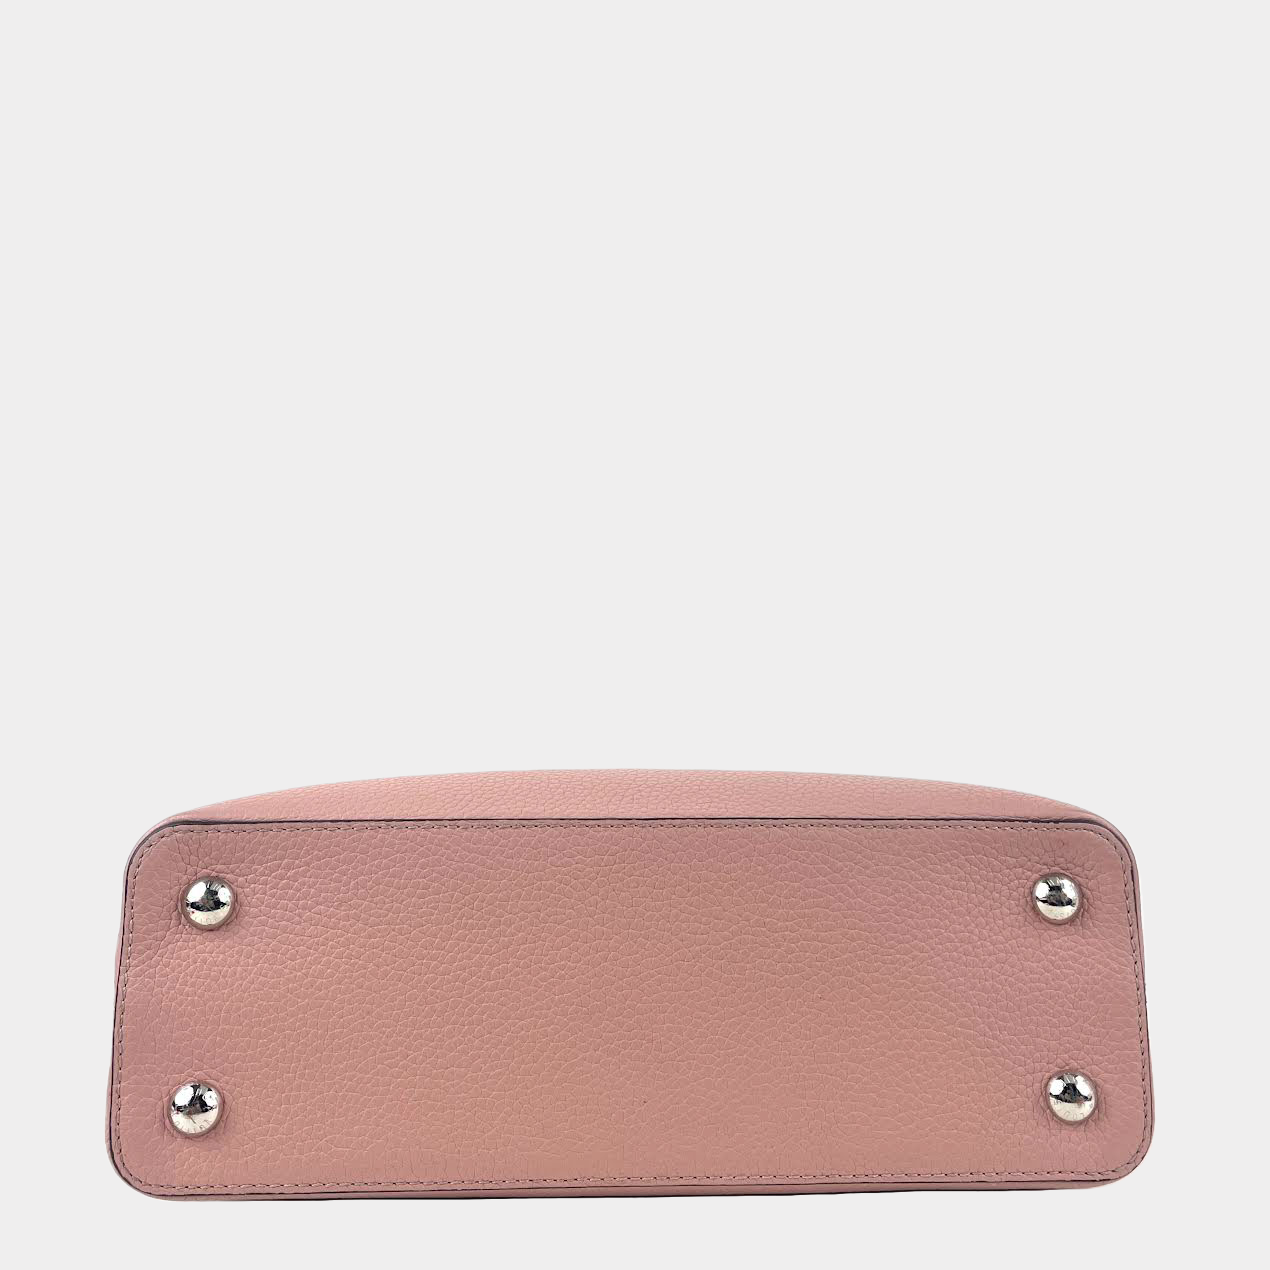 Louis Vuitton Brown/Pink Taurillon Leather Capucines Wallet